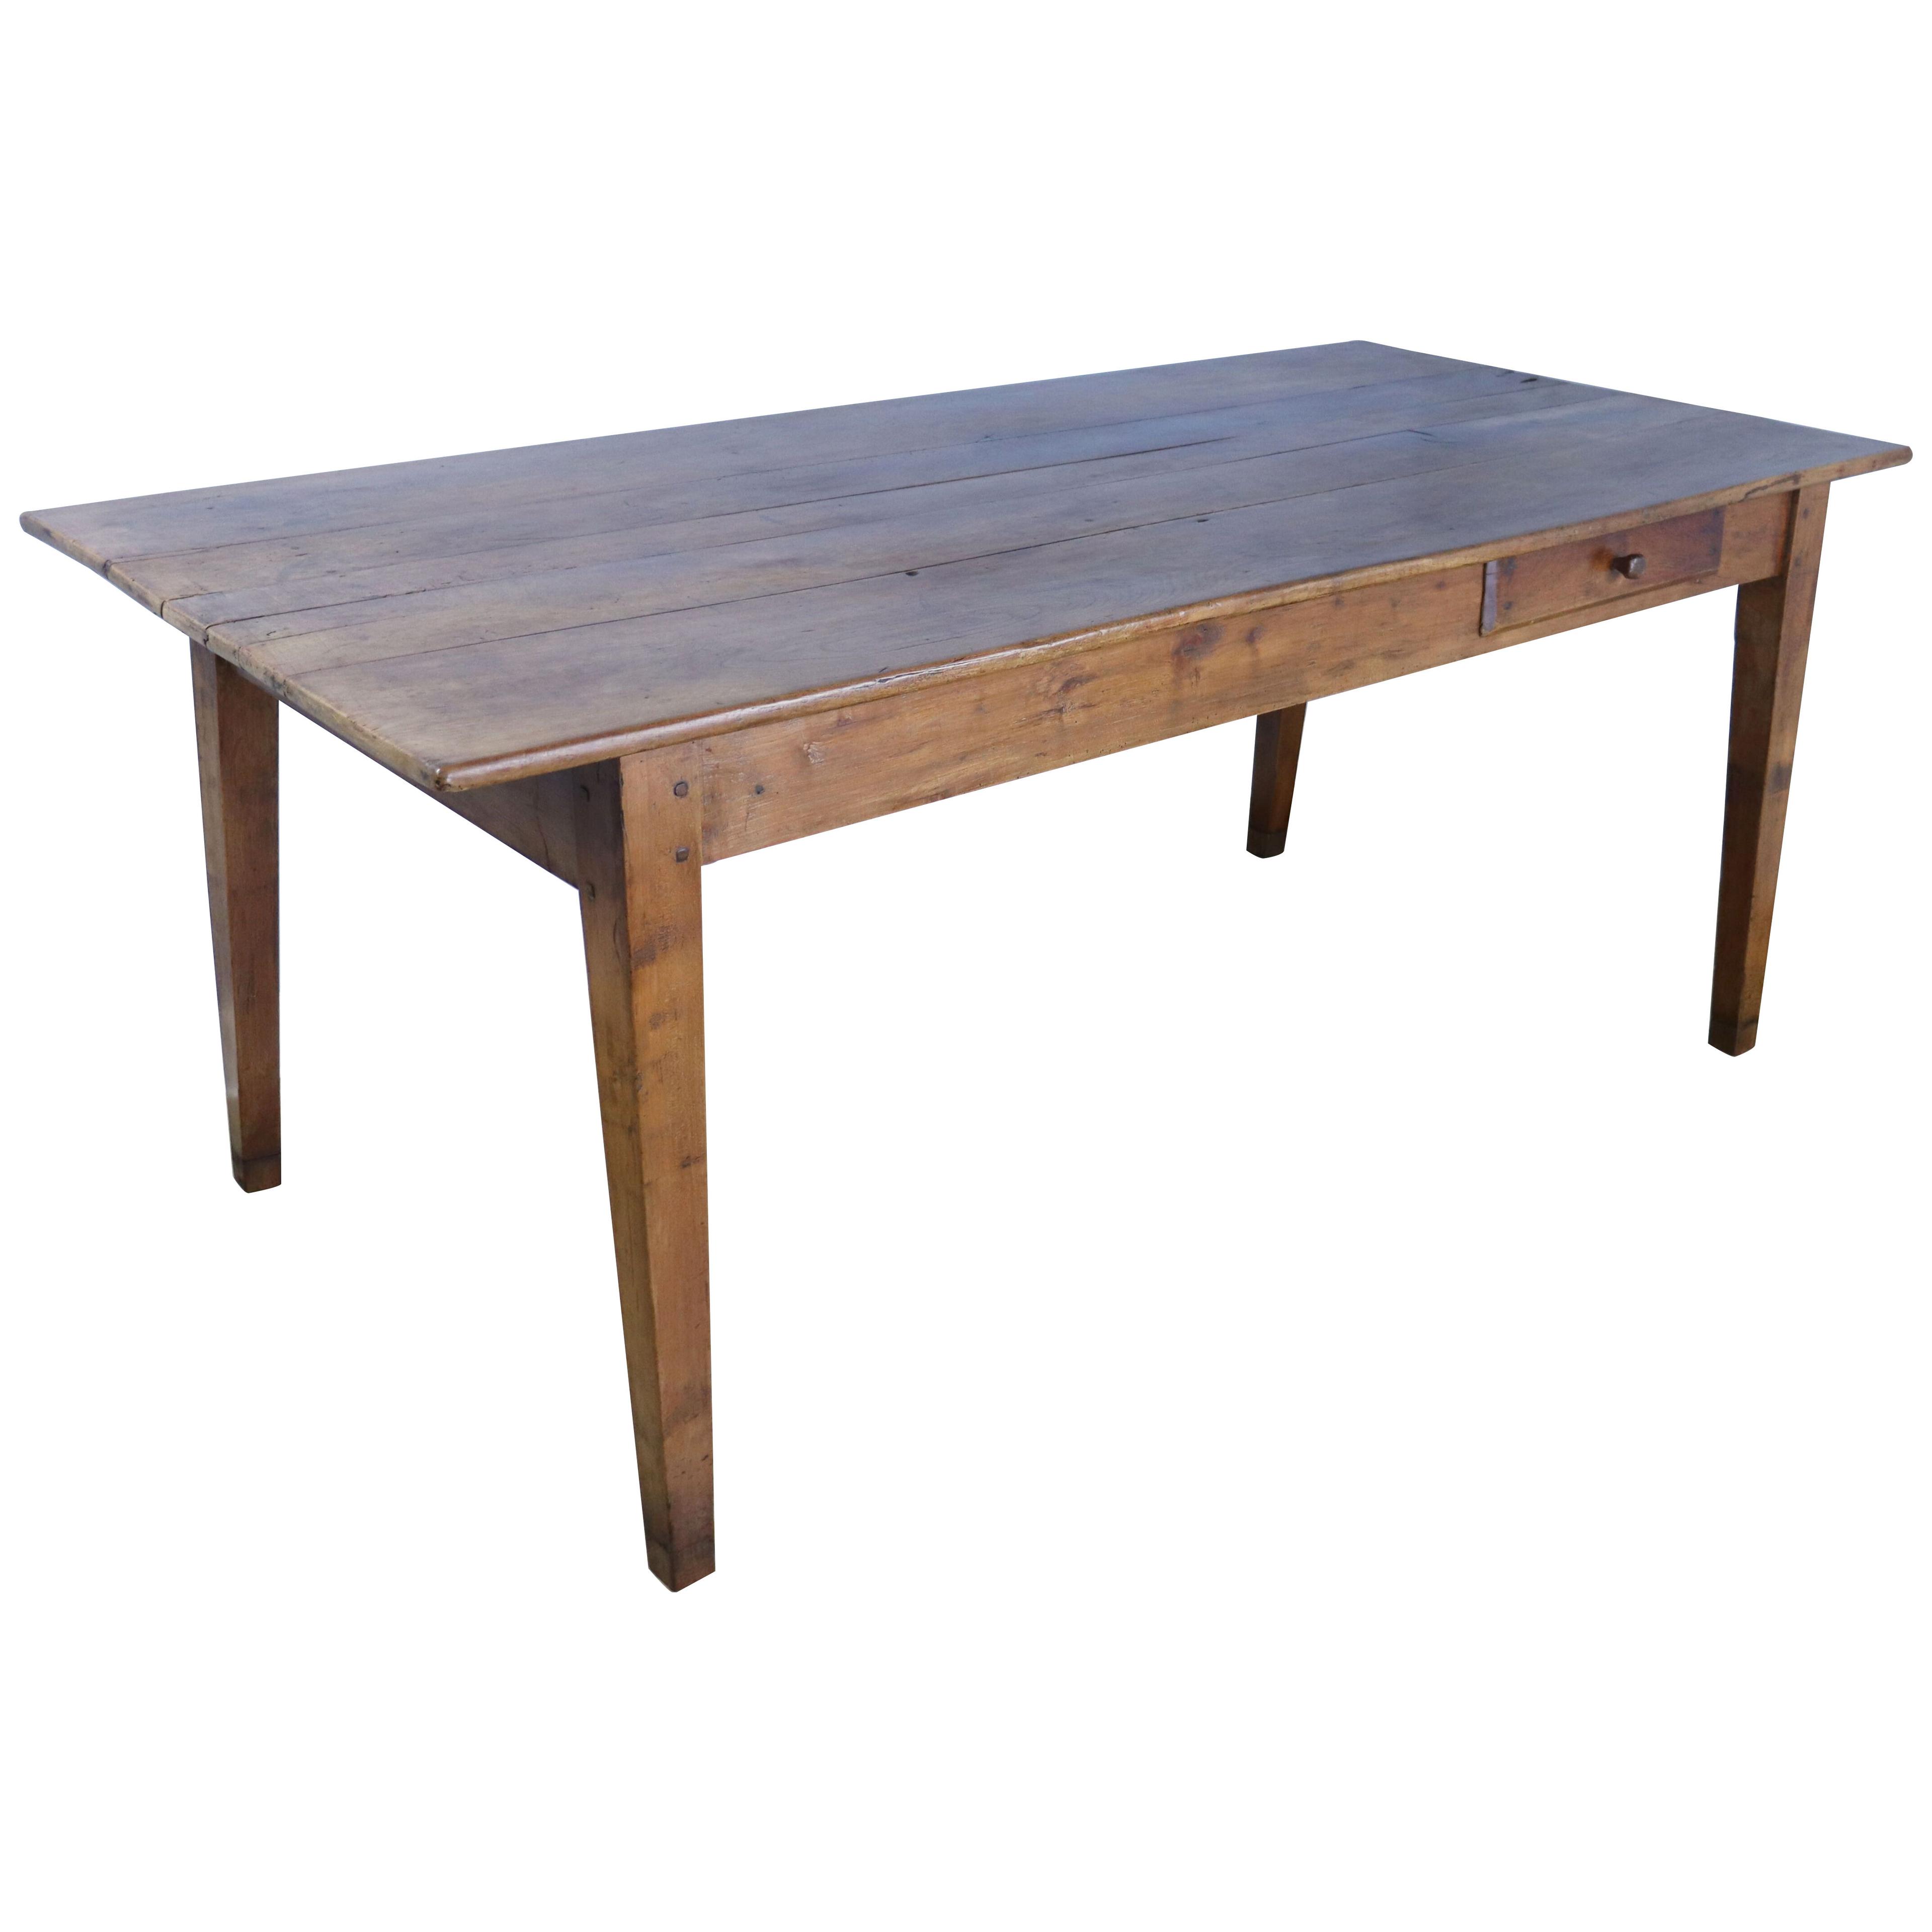 Wide Cherry Farm Table with Single Drawer and Bread Slide